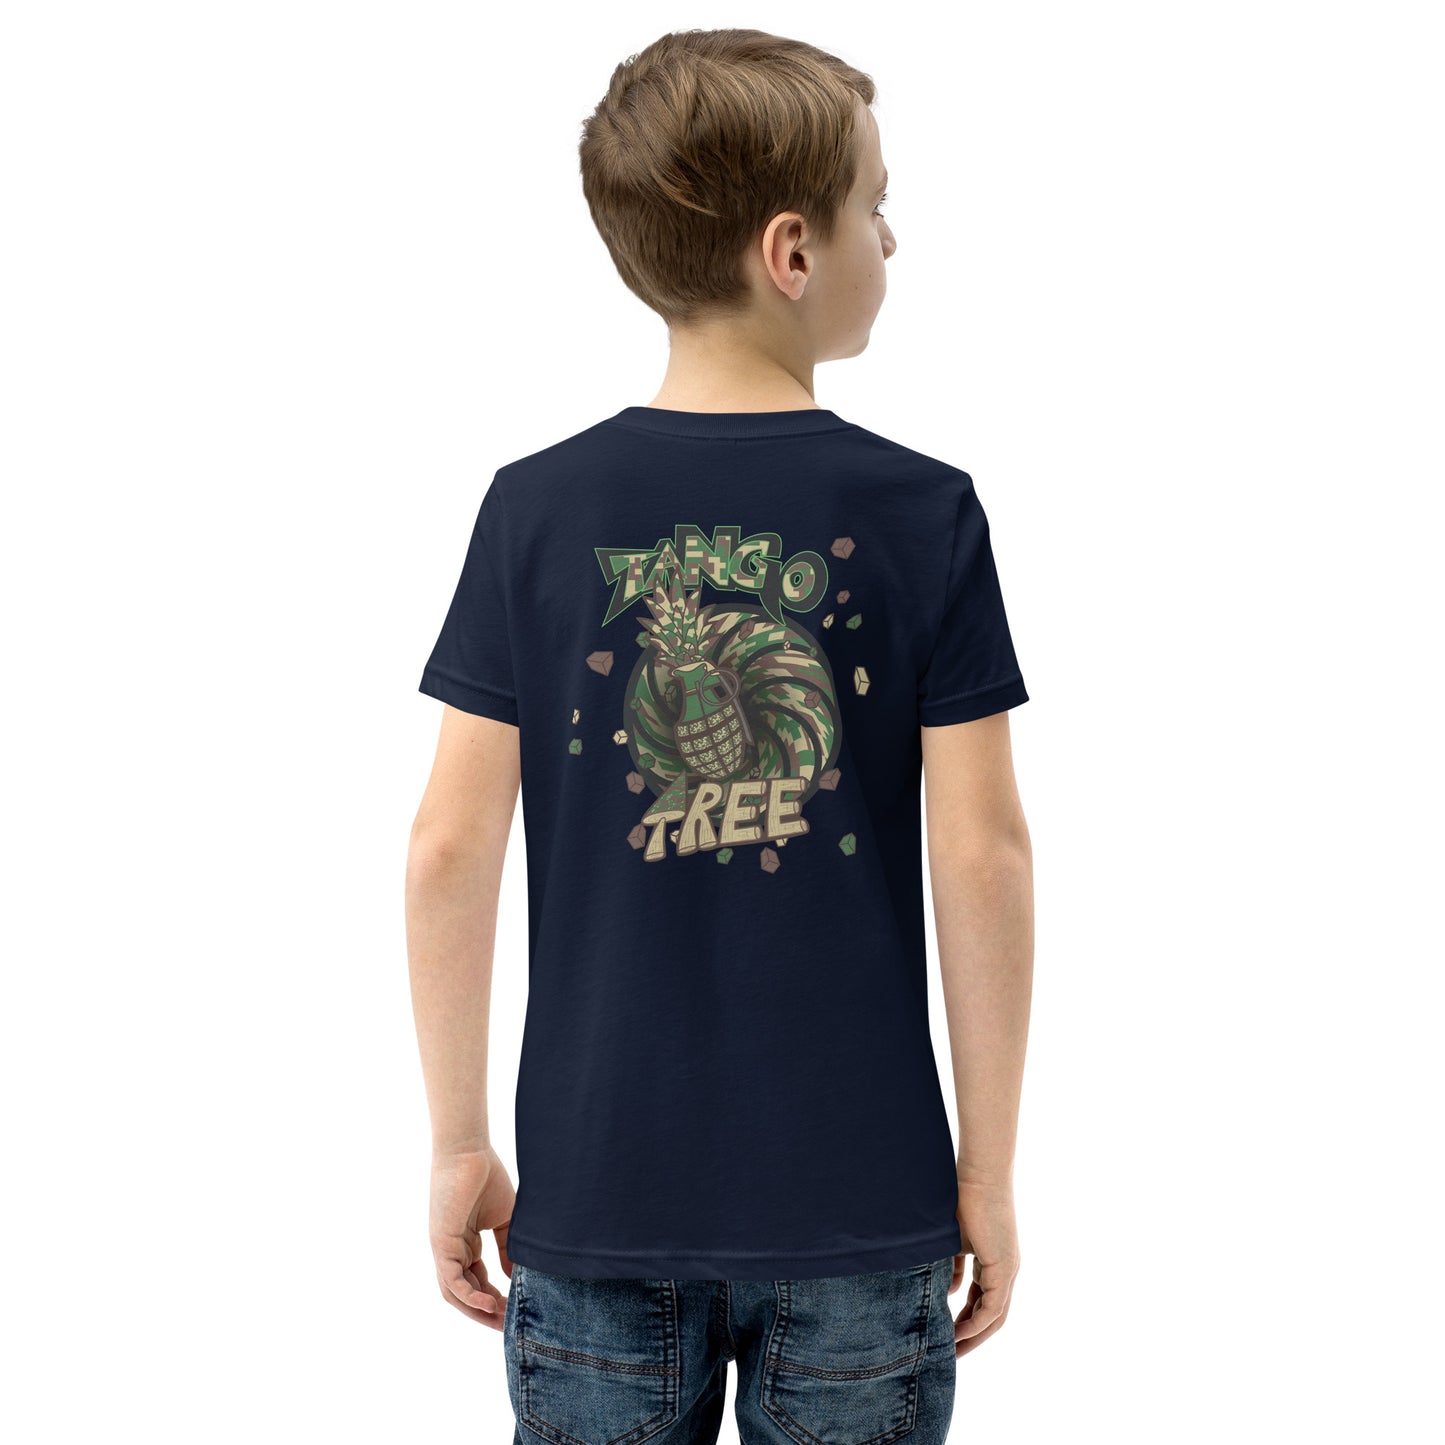 Youth Short Sleeve T-Shirt "Digi The Pineapple Grenade Vortex!" Digital Can't See Me Edition